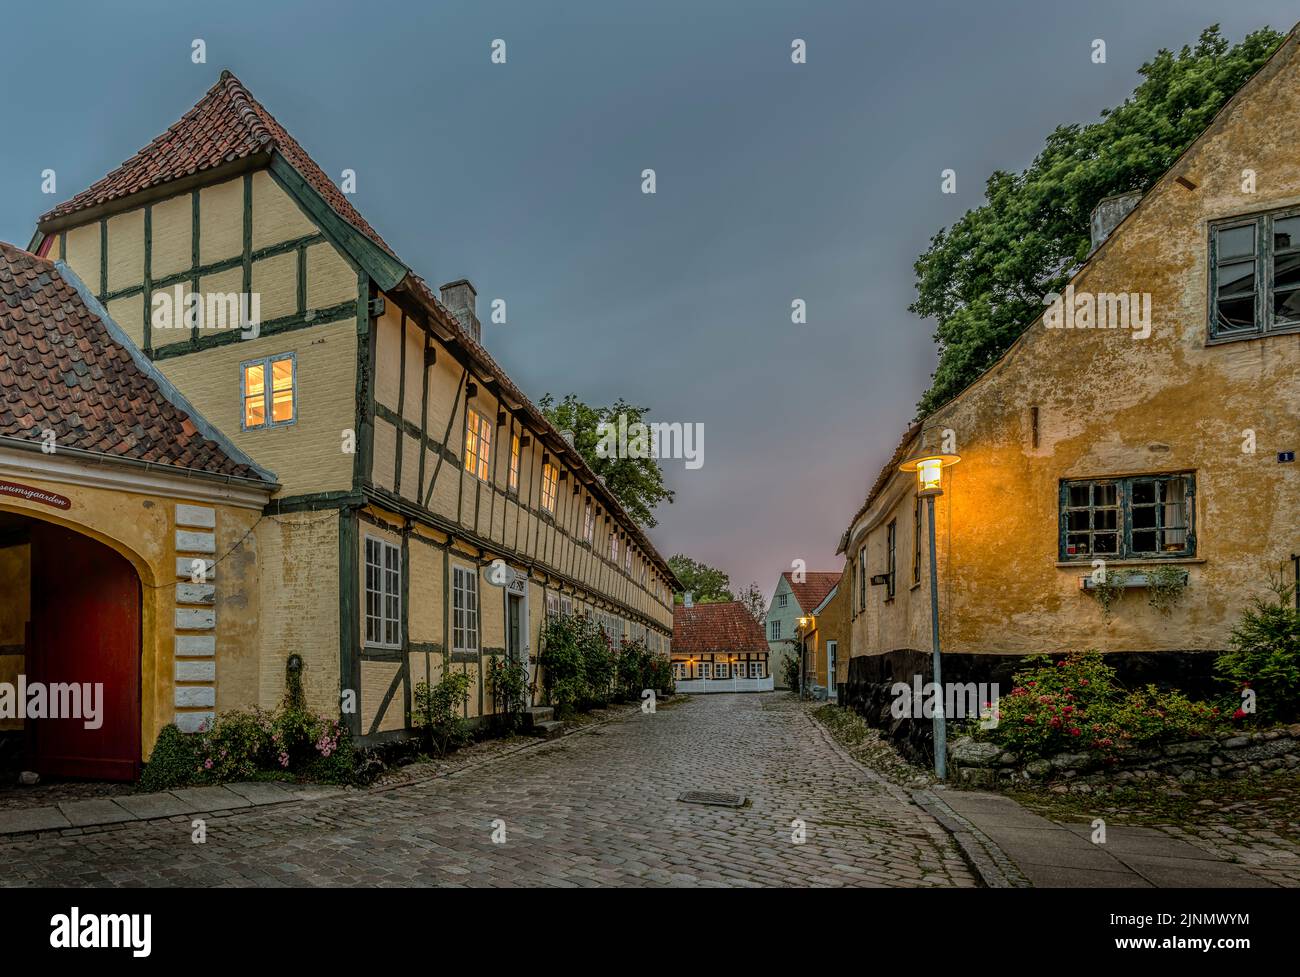 The old half-timbered museum and ancient houses on a cobbled street in dim evening light in Mariager, Denmark, August 7, 2022 Stock Photo